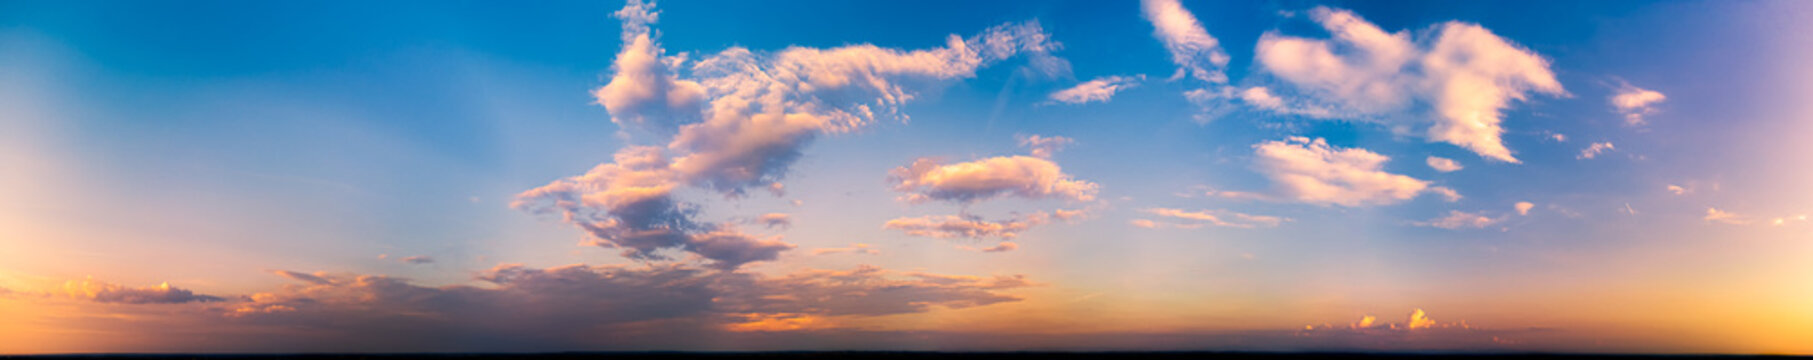 Sunset panorama of blue sky and orange clouds.